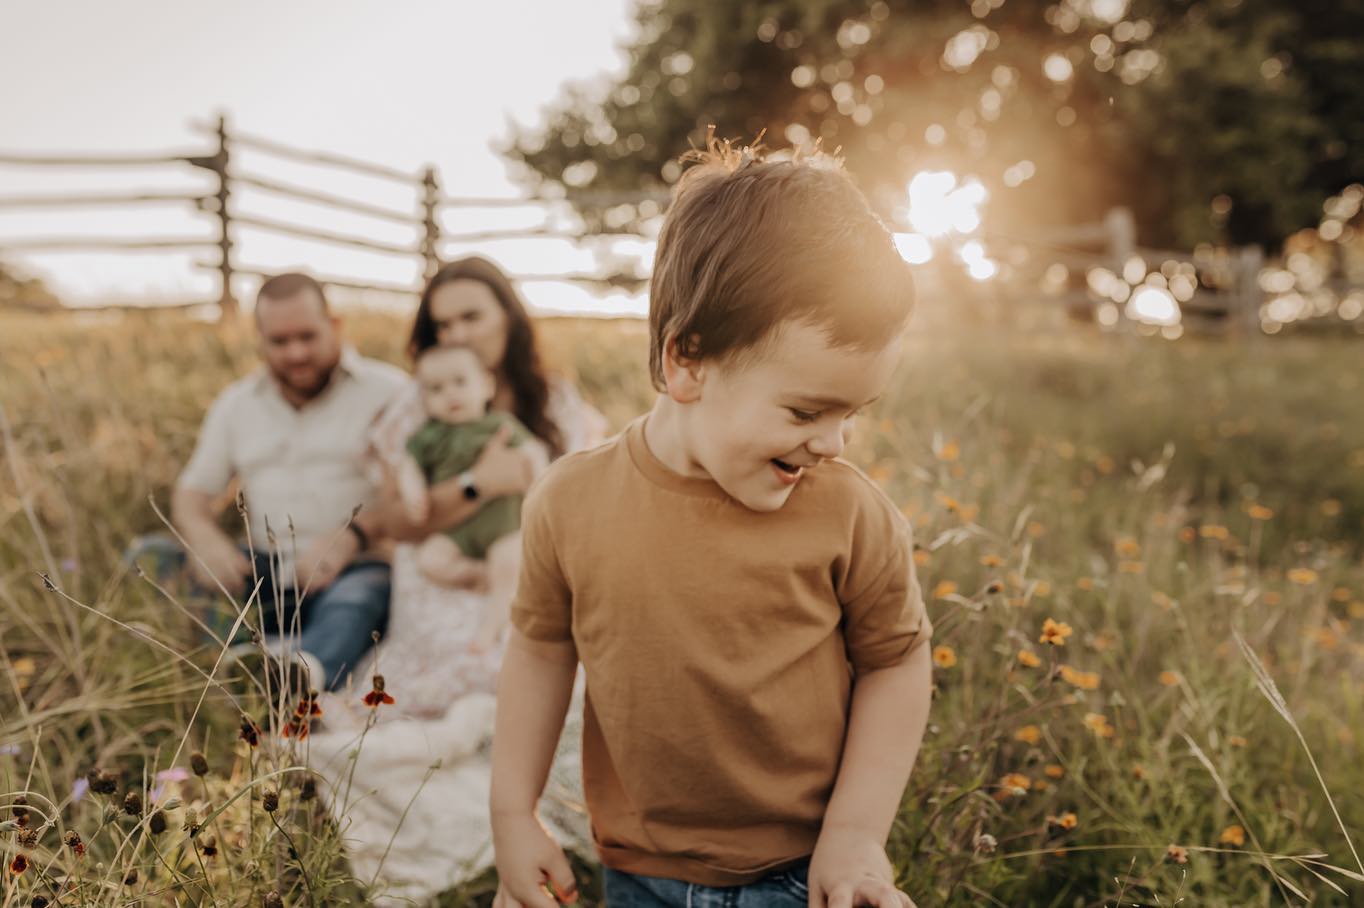 Family photo session at a field during sunset by San Antonio family photographer.